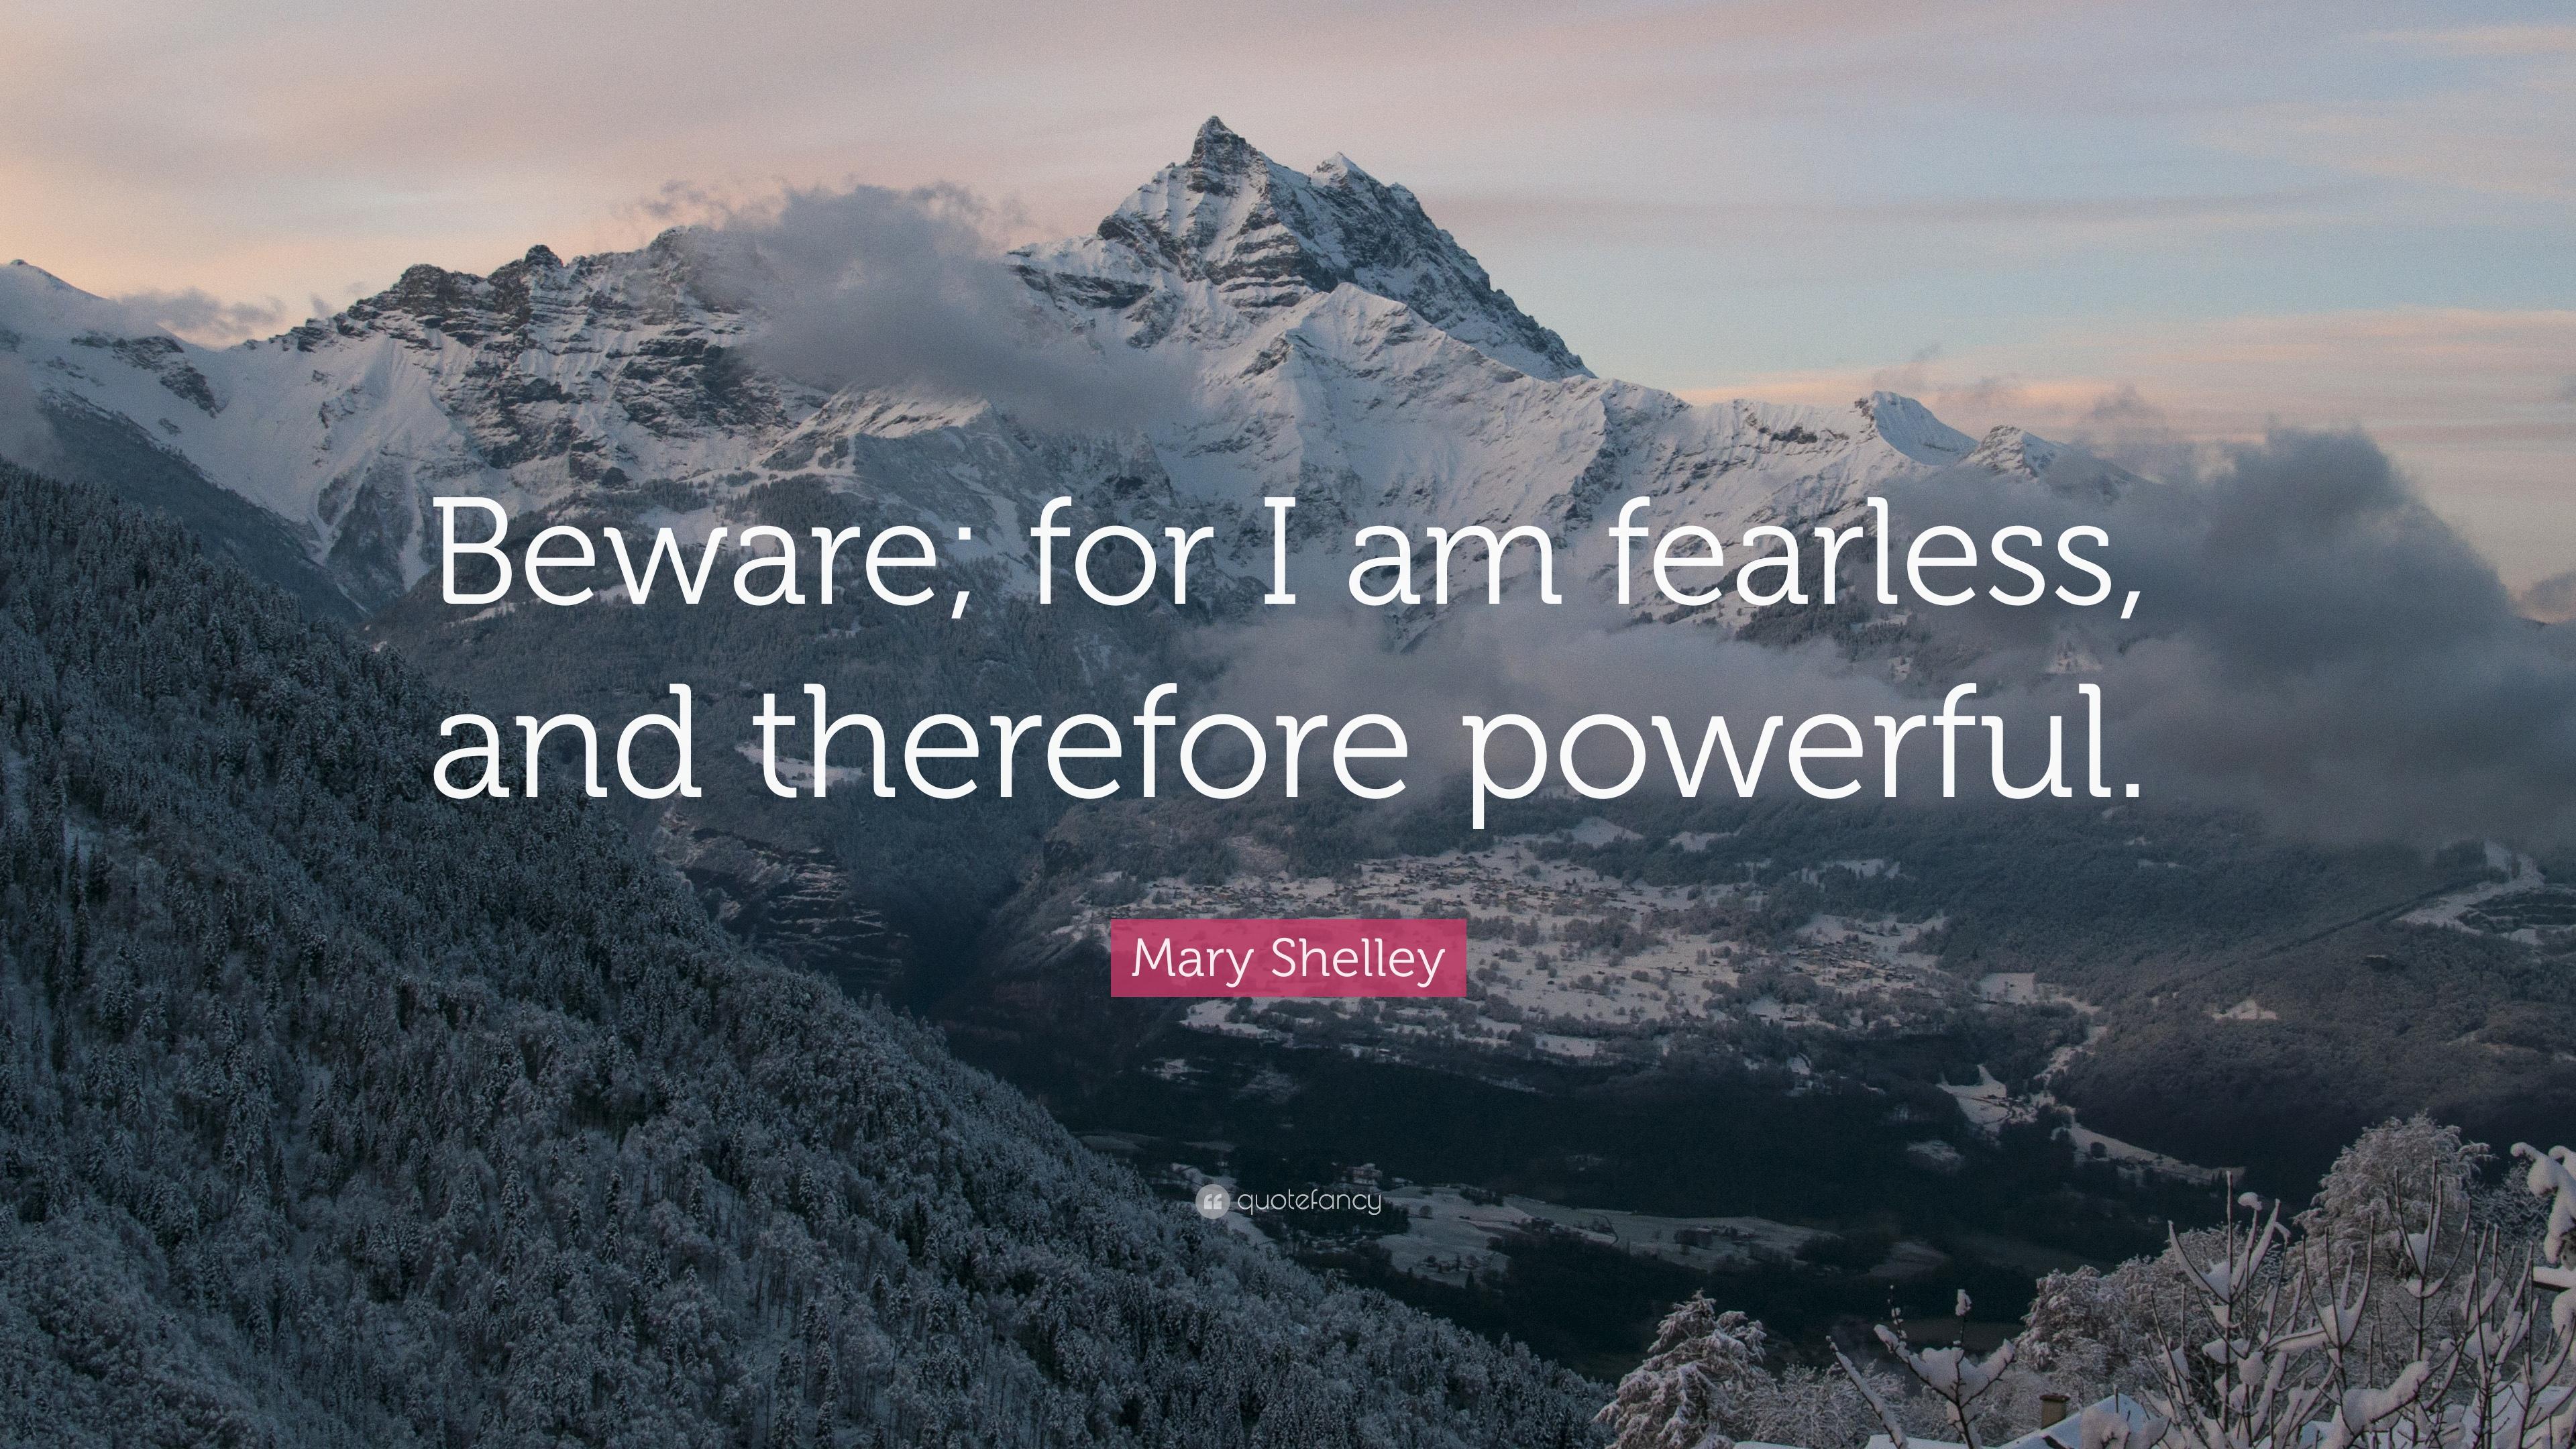 Mary Shelley Quote: “Beware; for I am fearless